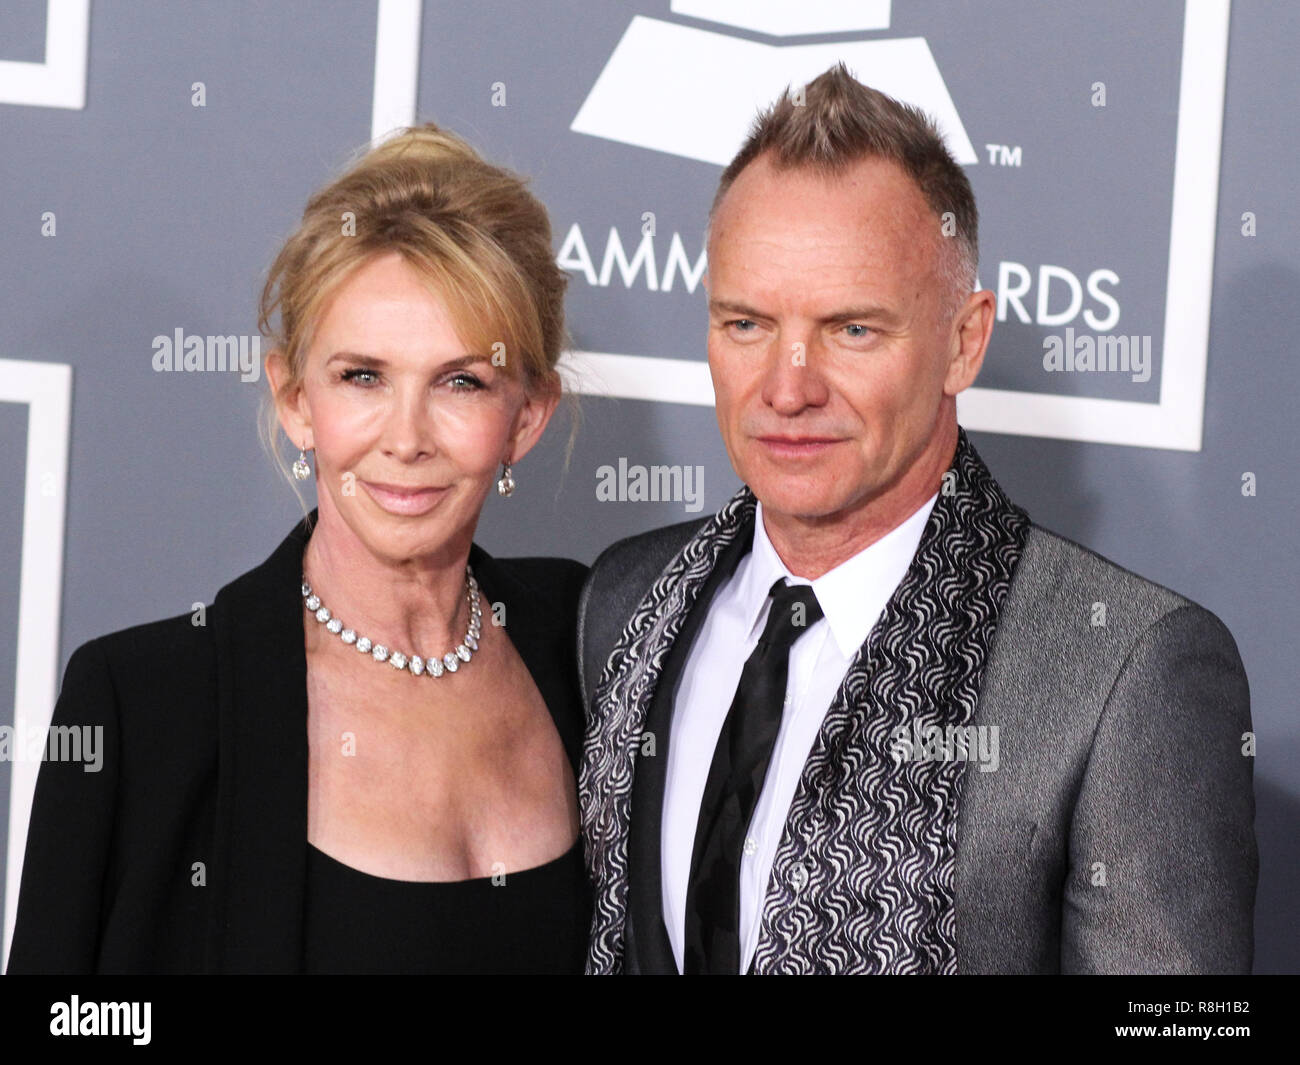 LOS ANGELES, CA, USA - FEBRUARY 10: Trudie Styler, Sting at the 55th Annual GRAMMY Awards held at Staples Center on February 10, 2013 in Los Angeles, California, United States. (Photo by Xavier Collin/Image Press Agency) Stock Photo